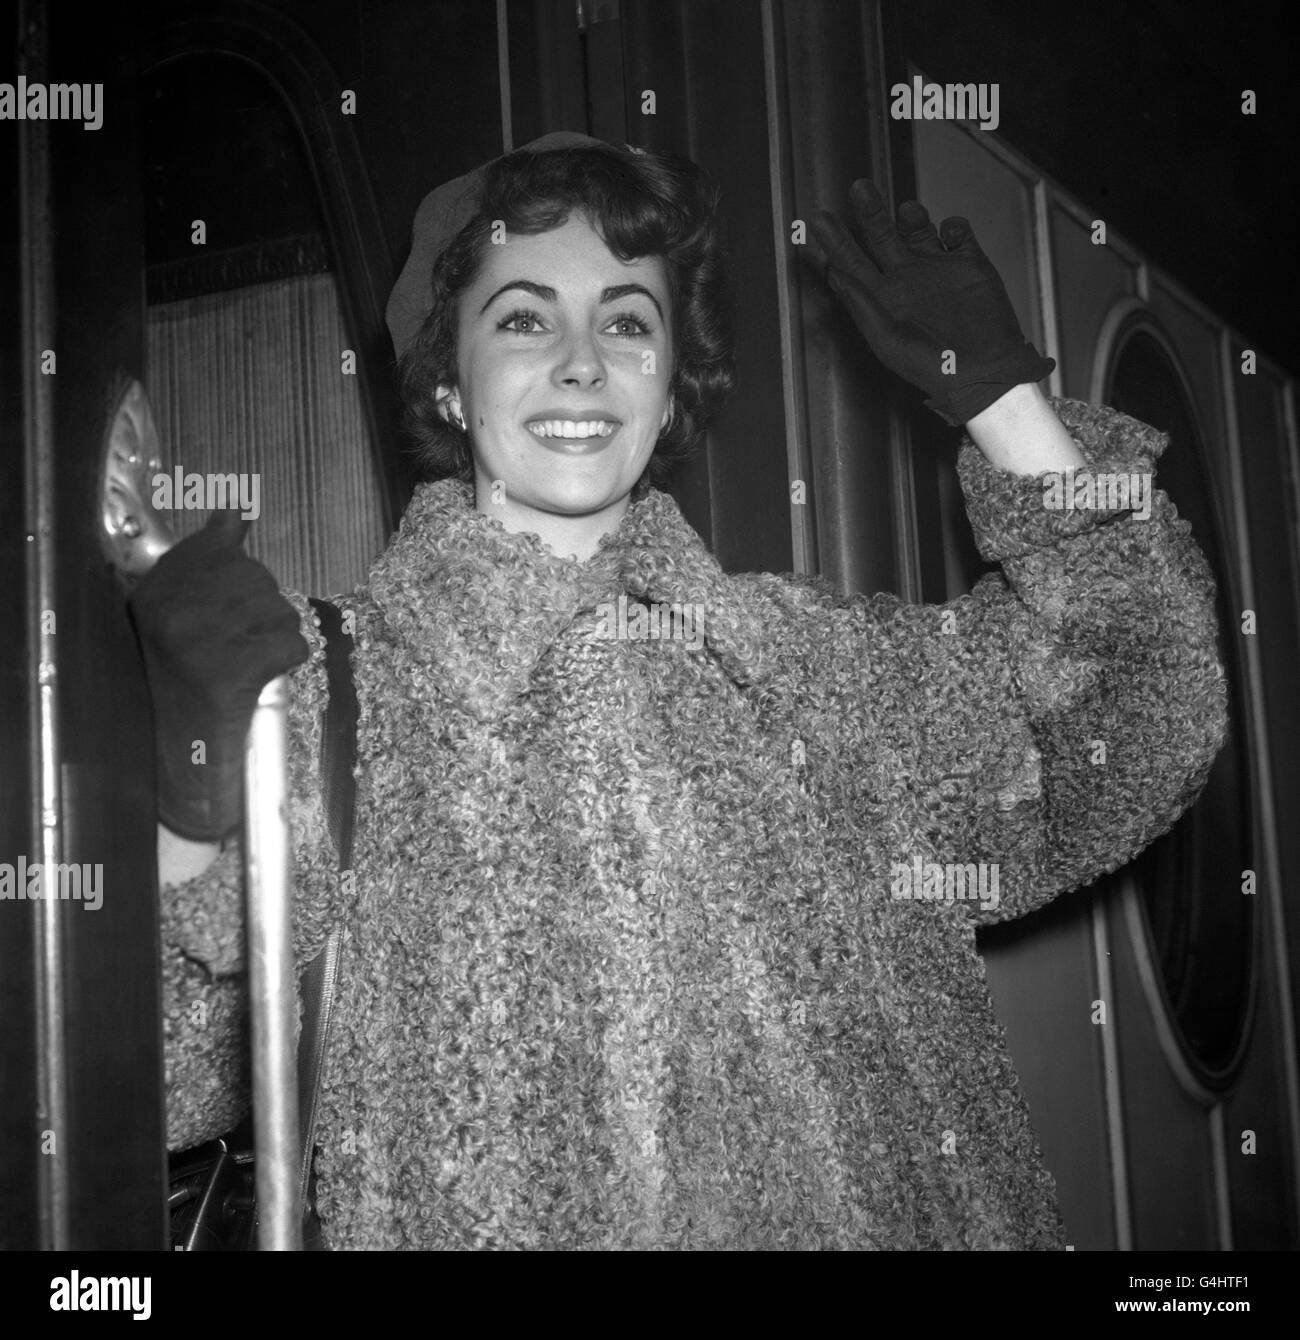 Sixteen-year-old British actress Elizabeth Taylor leaving Victoria Station in London for Paris, where she will spend a few days before going to the United States to see her fiance American football star Glen Davis. Stock Photo